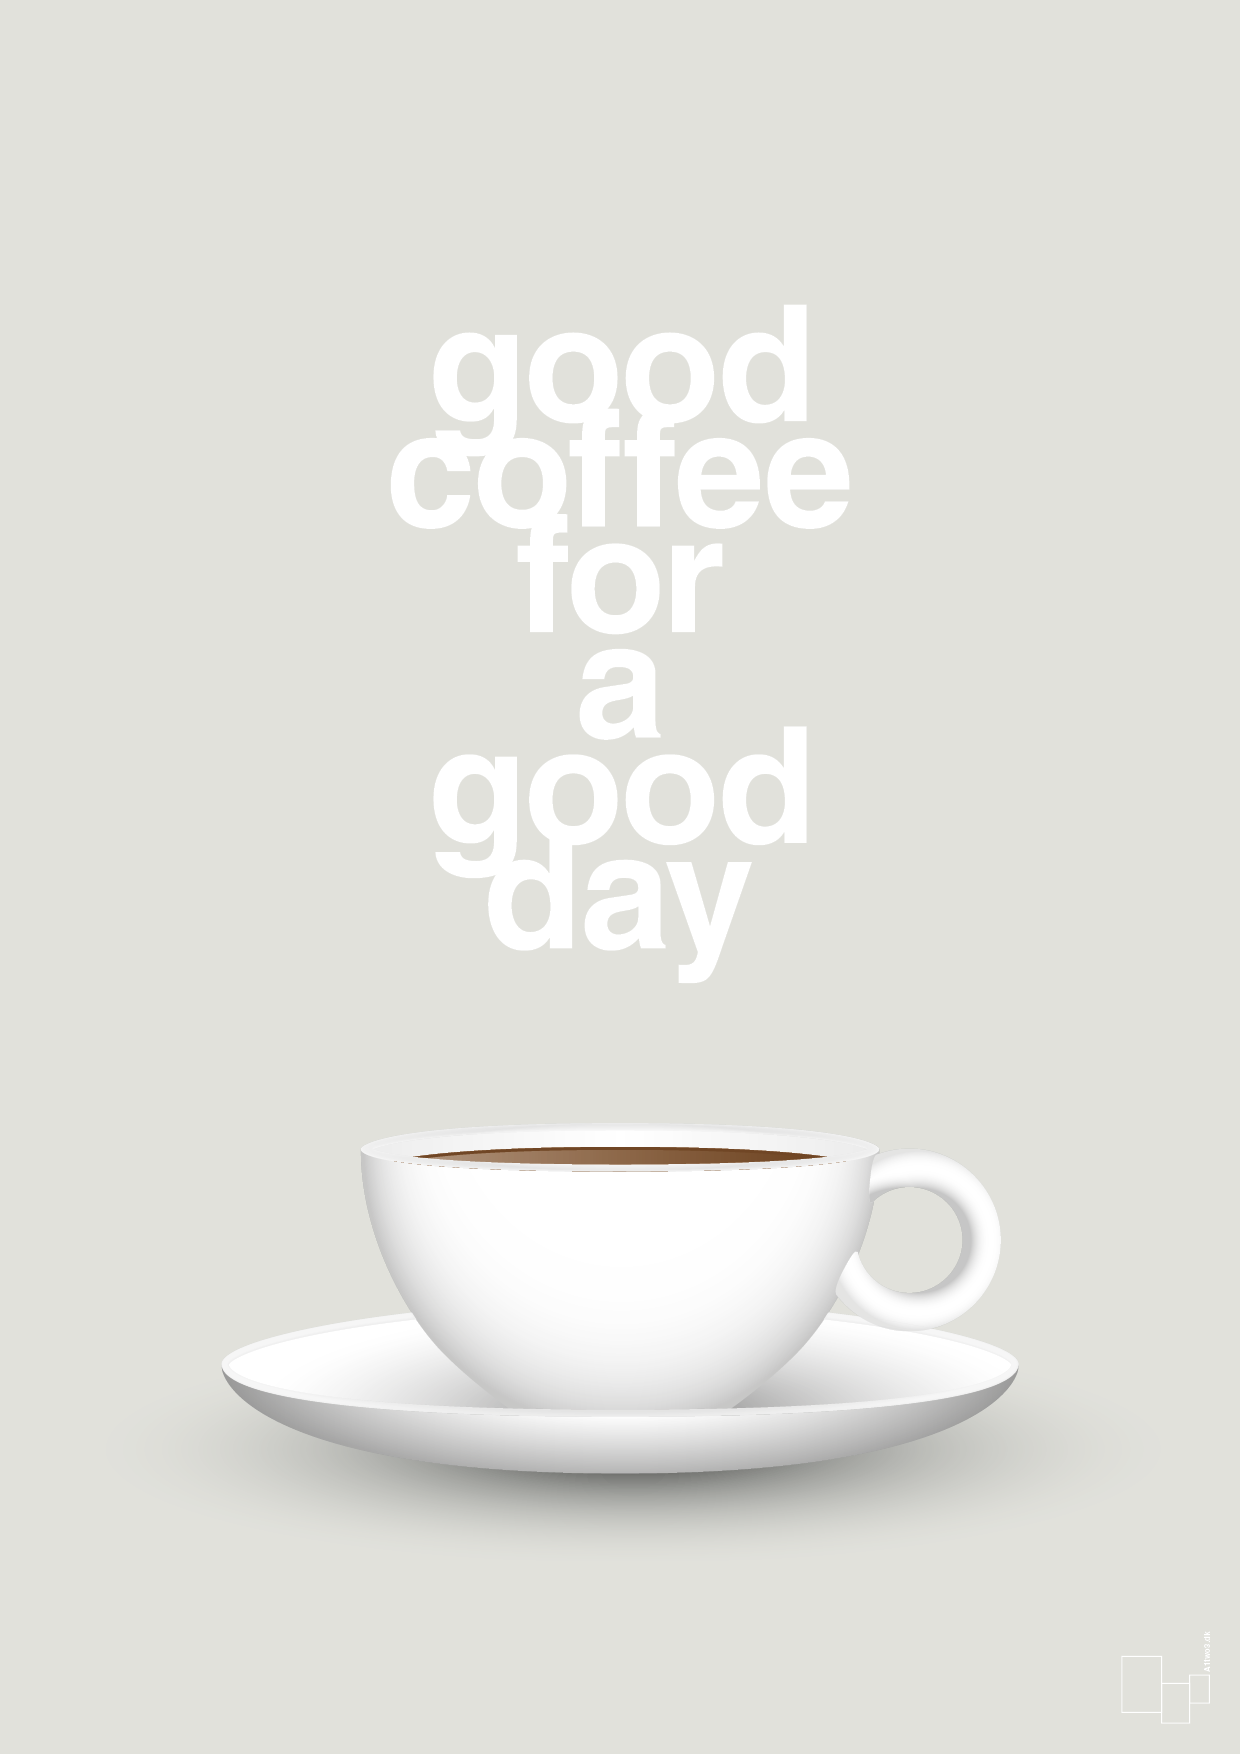 good coffee for a good day - Plakat med Mad & Drikke i Painters White